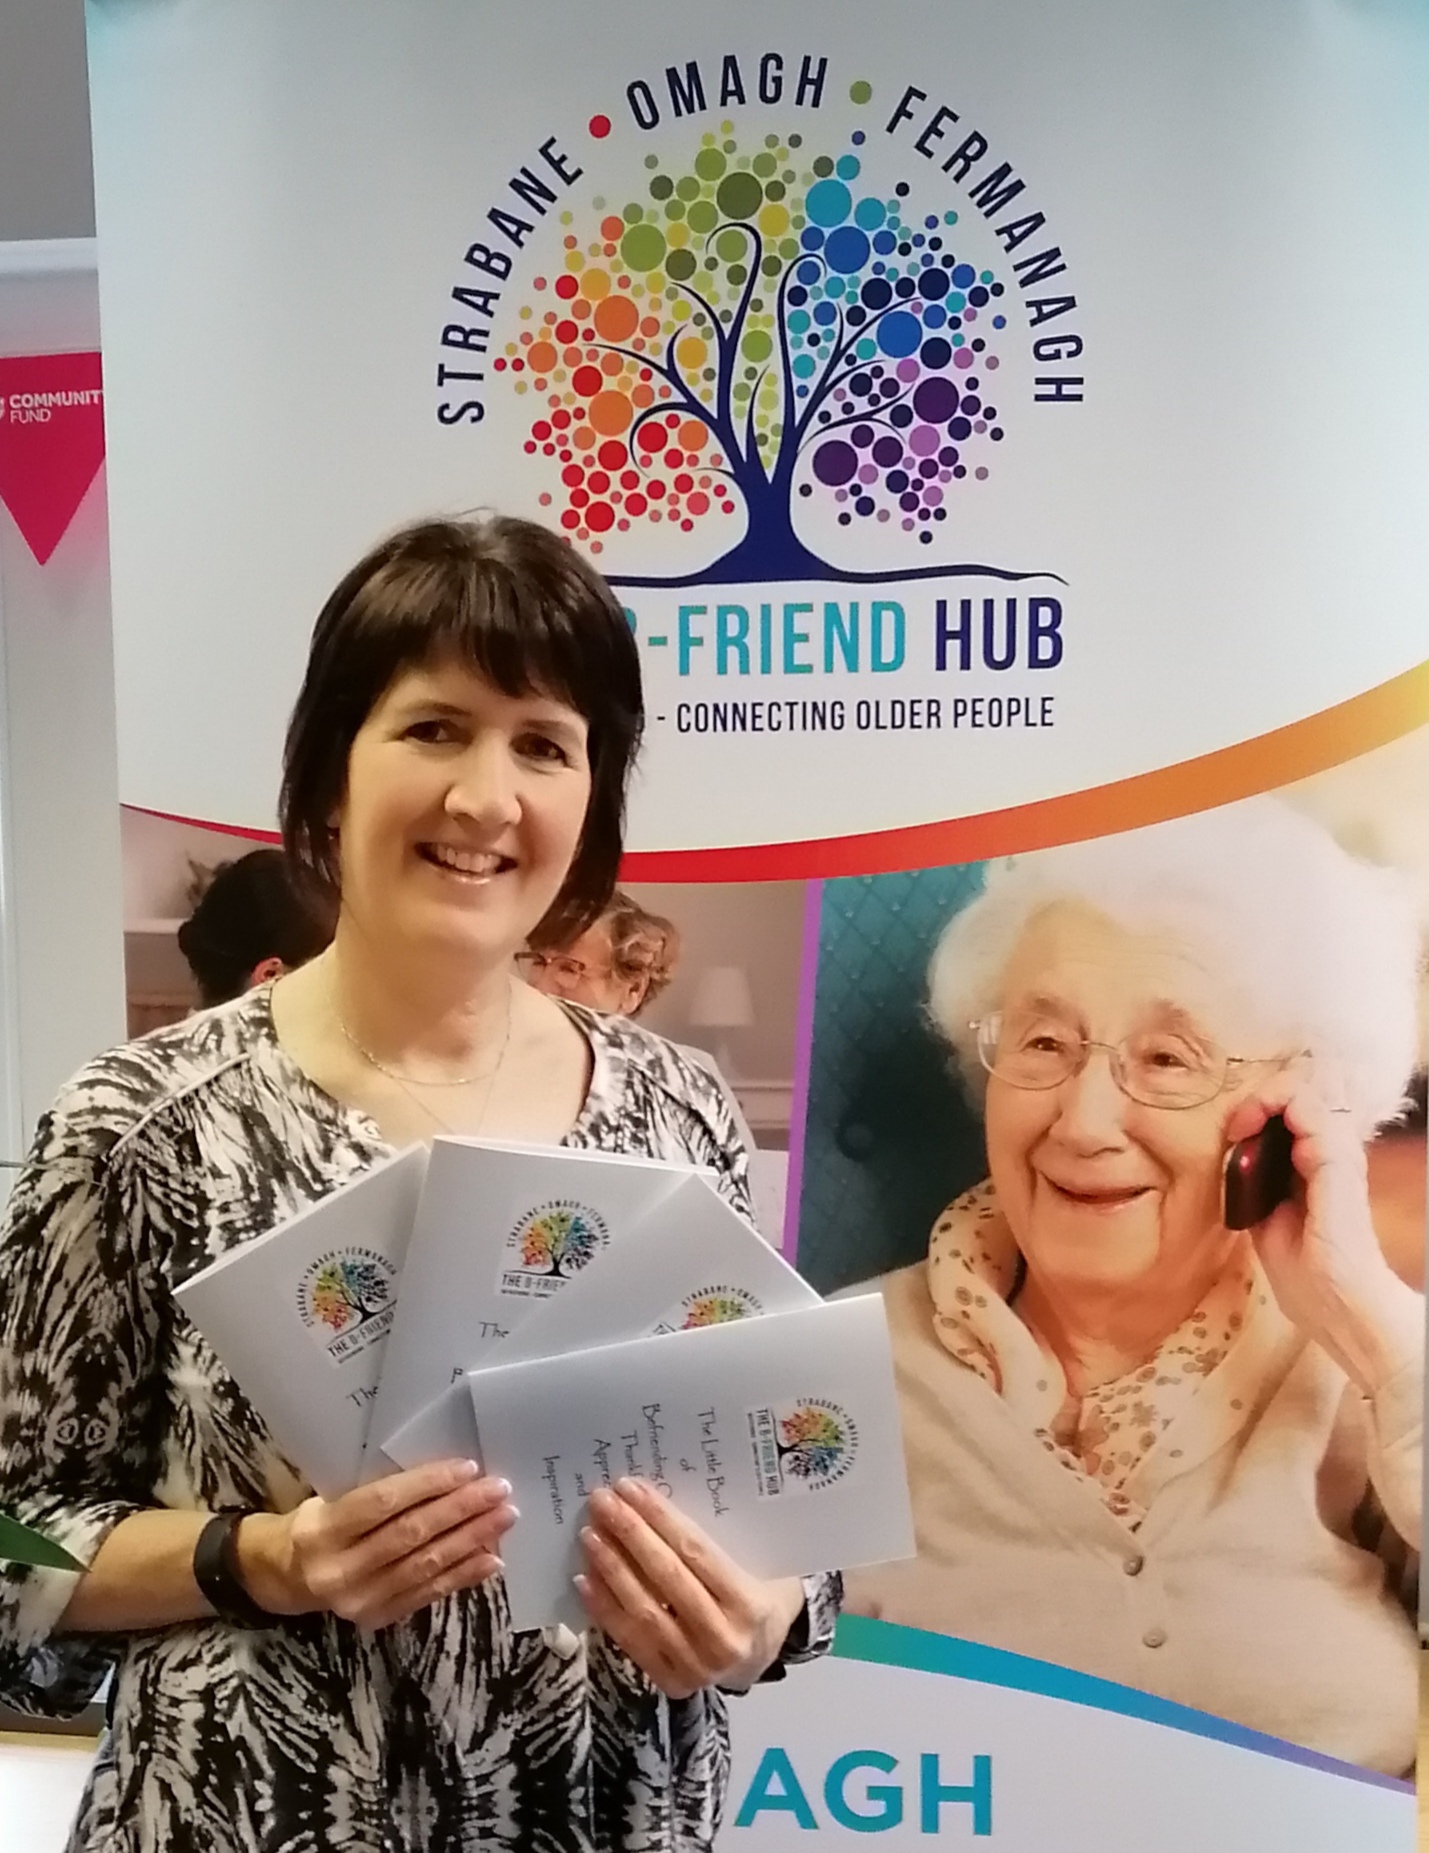 Book of quotes brings smiles to ‘befriending’ users